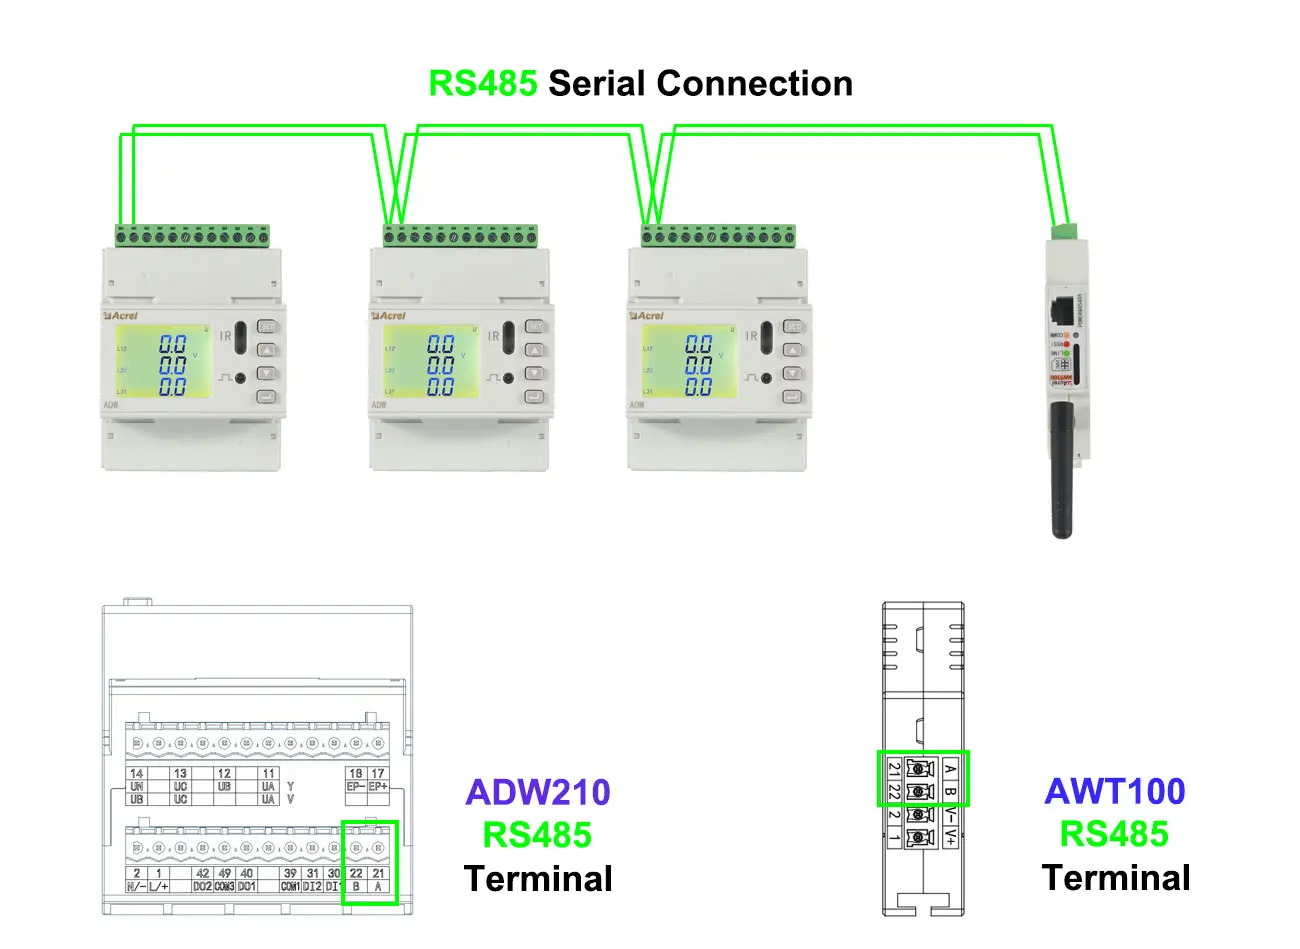 Wiring between more than 1 ADW210 Main Bodies and 1 AWT100 Communication Module